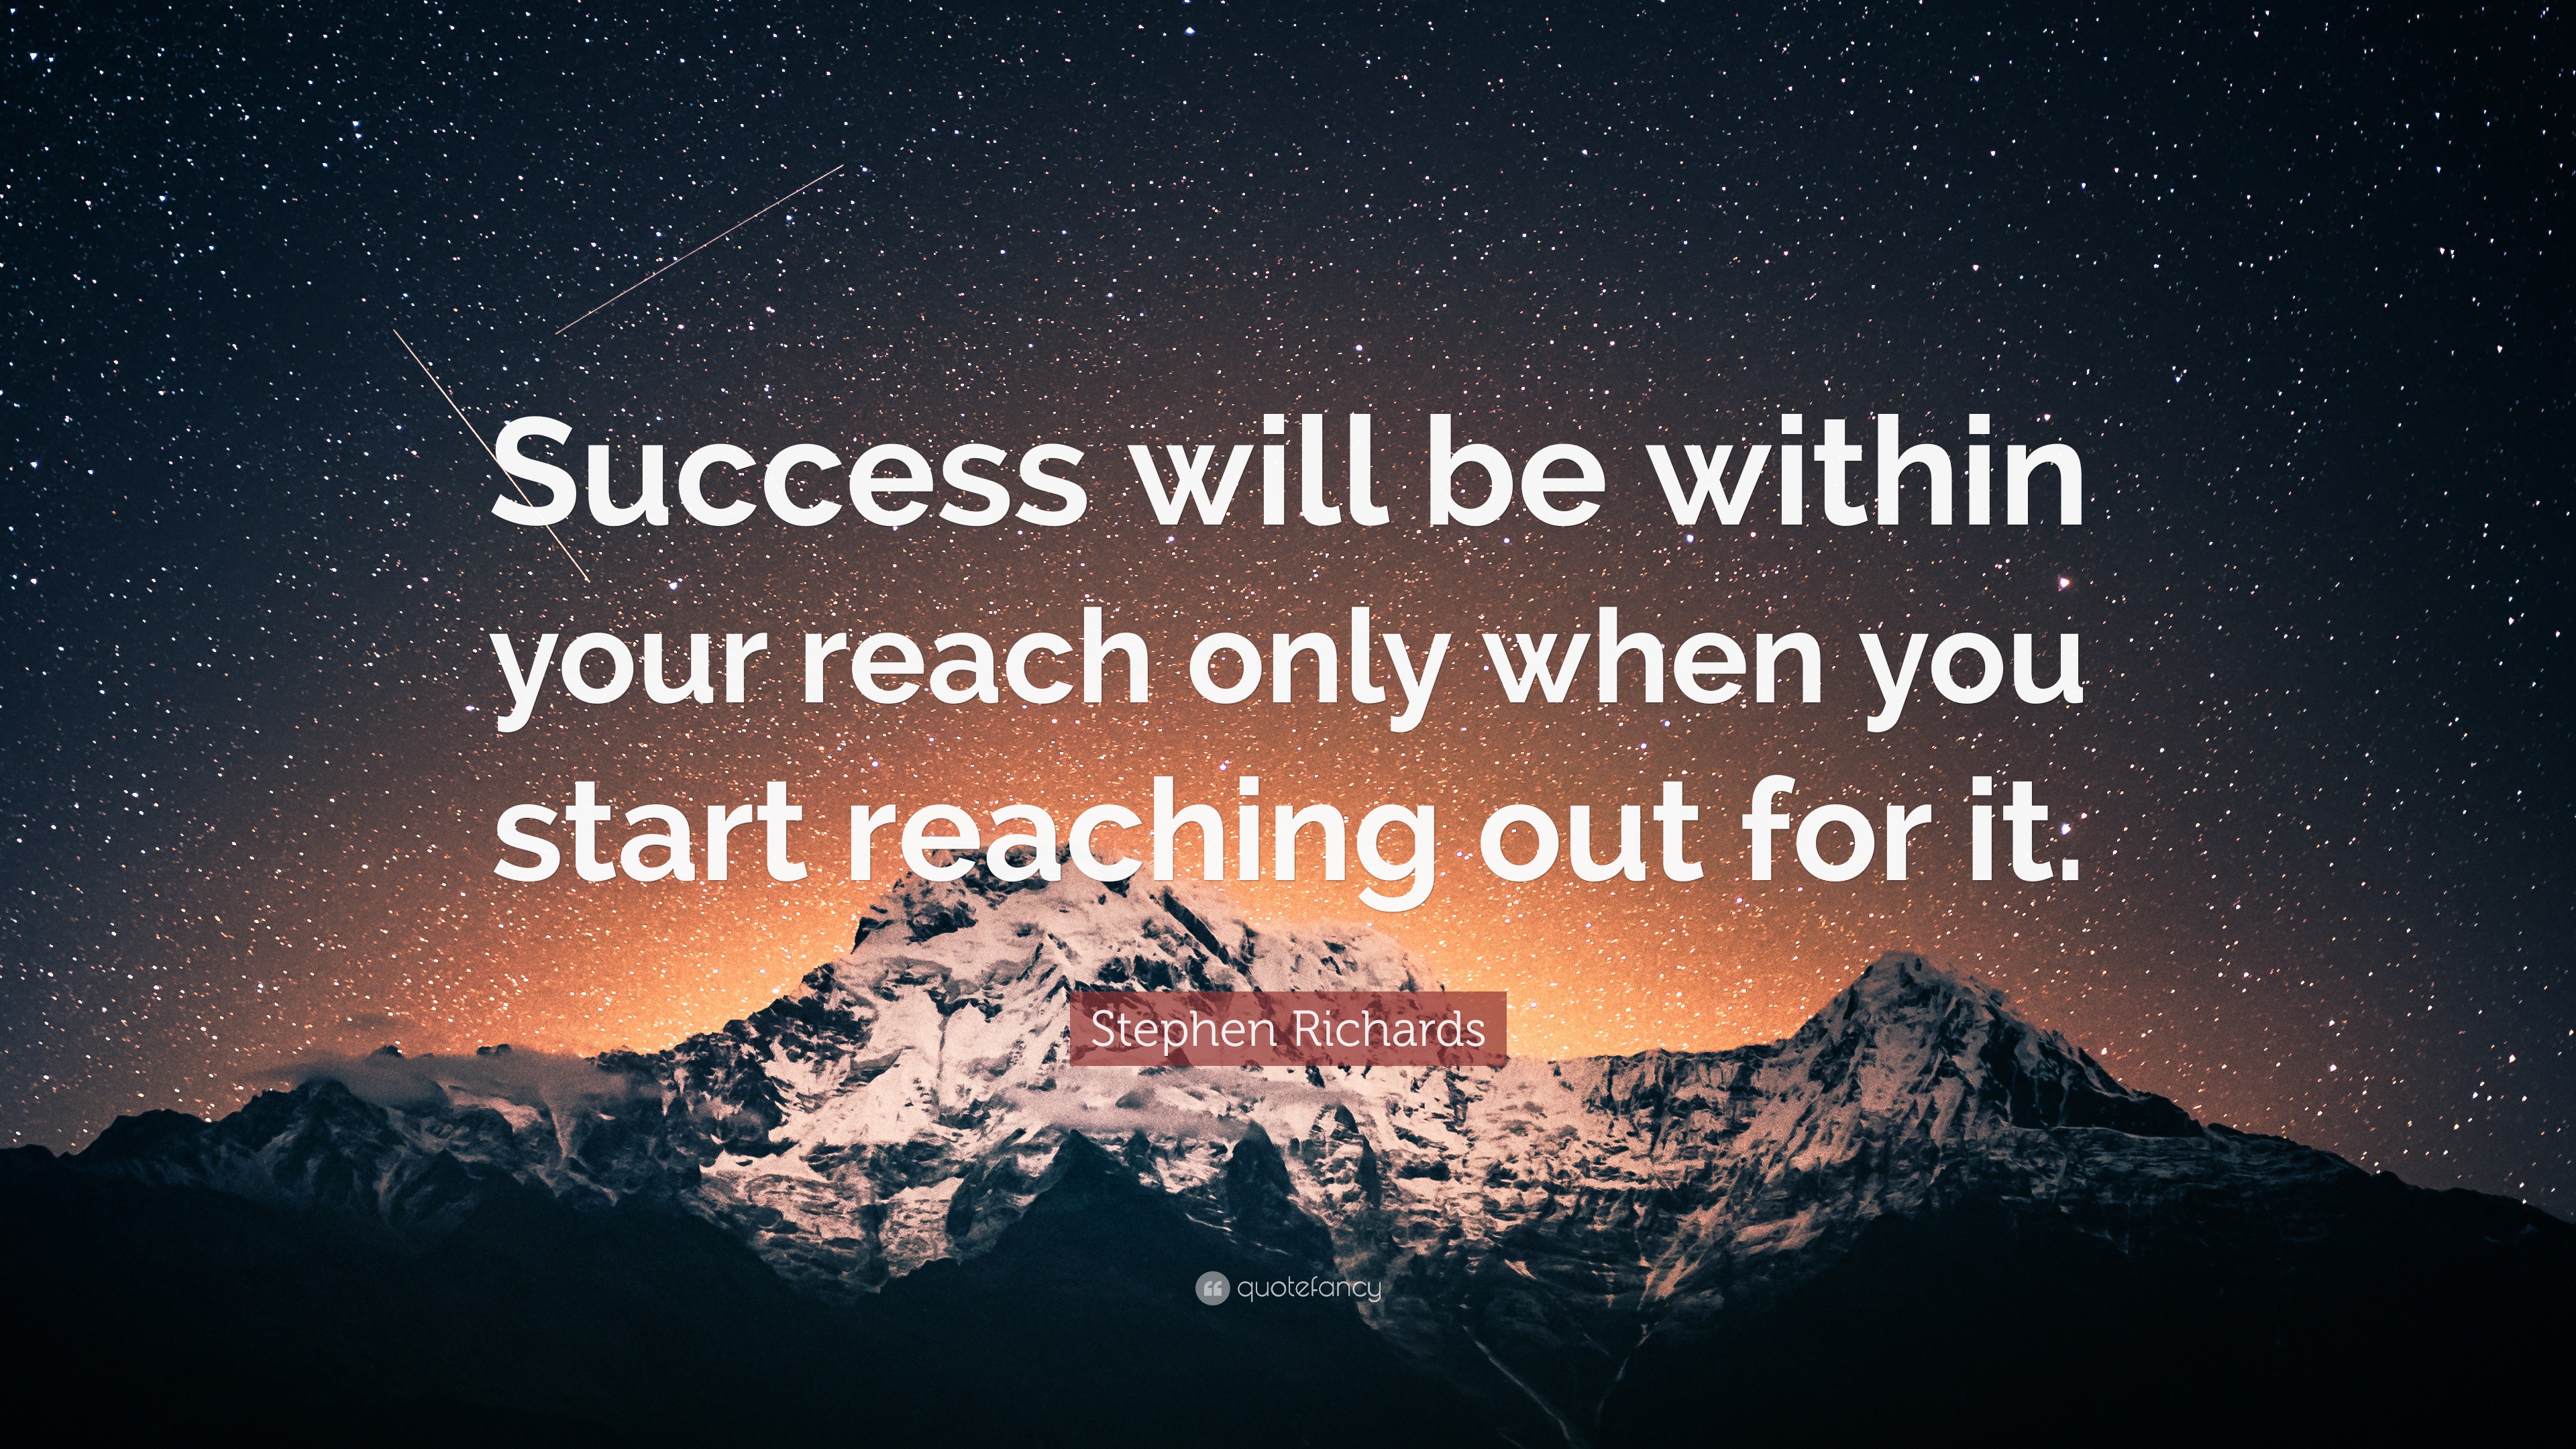 Stephen Richards Quote: “Success will be within your reach only when